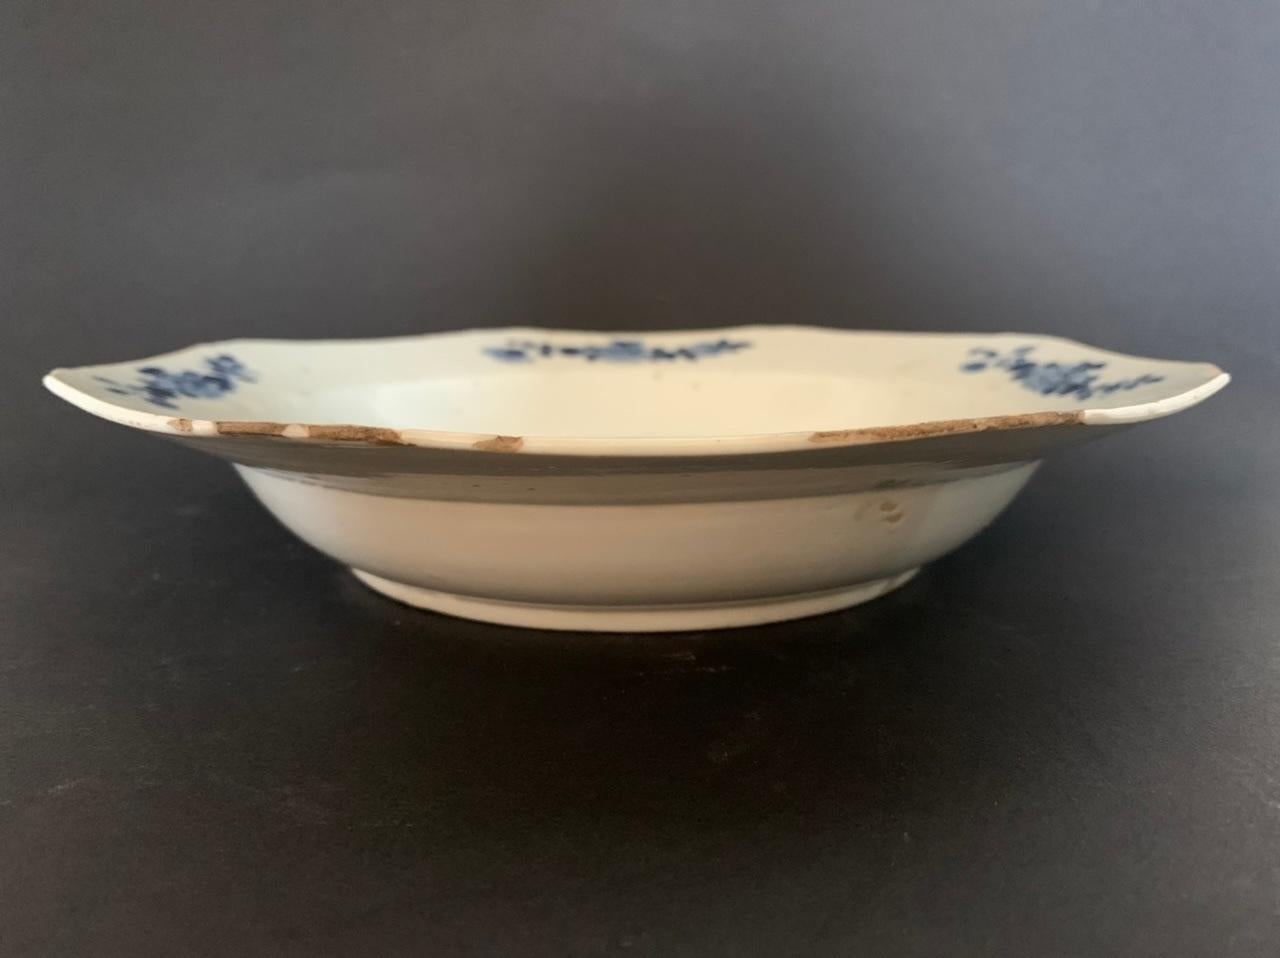 Nice plate of the Compagnie des Indes dating from the Qianlong period, XVIIIth century. Blue and white porcelain soup plate. On this plate are drawn in blue ink a set of plants or we can see magnolias or roses. 
This porcelain is characteristic of